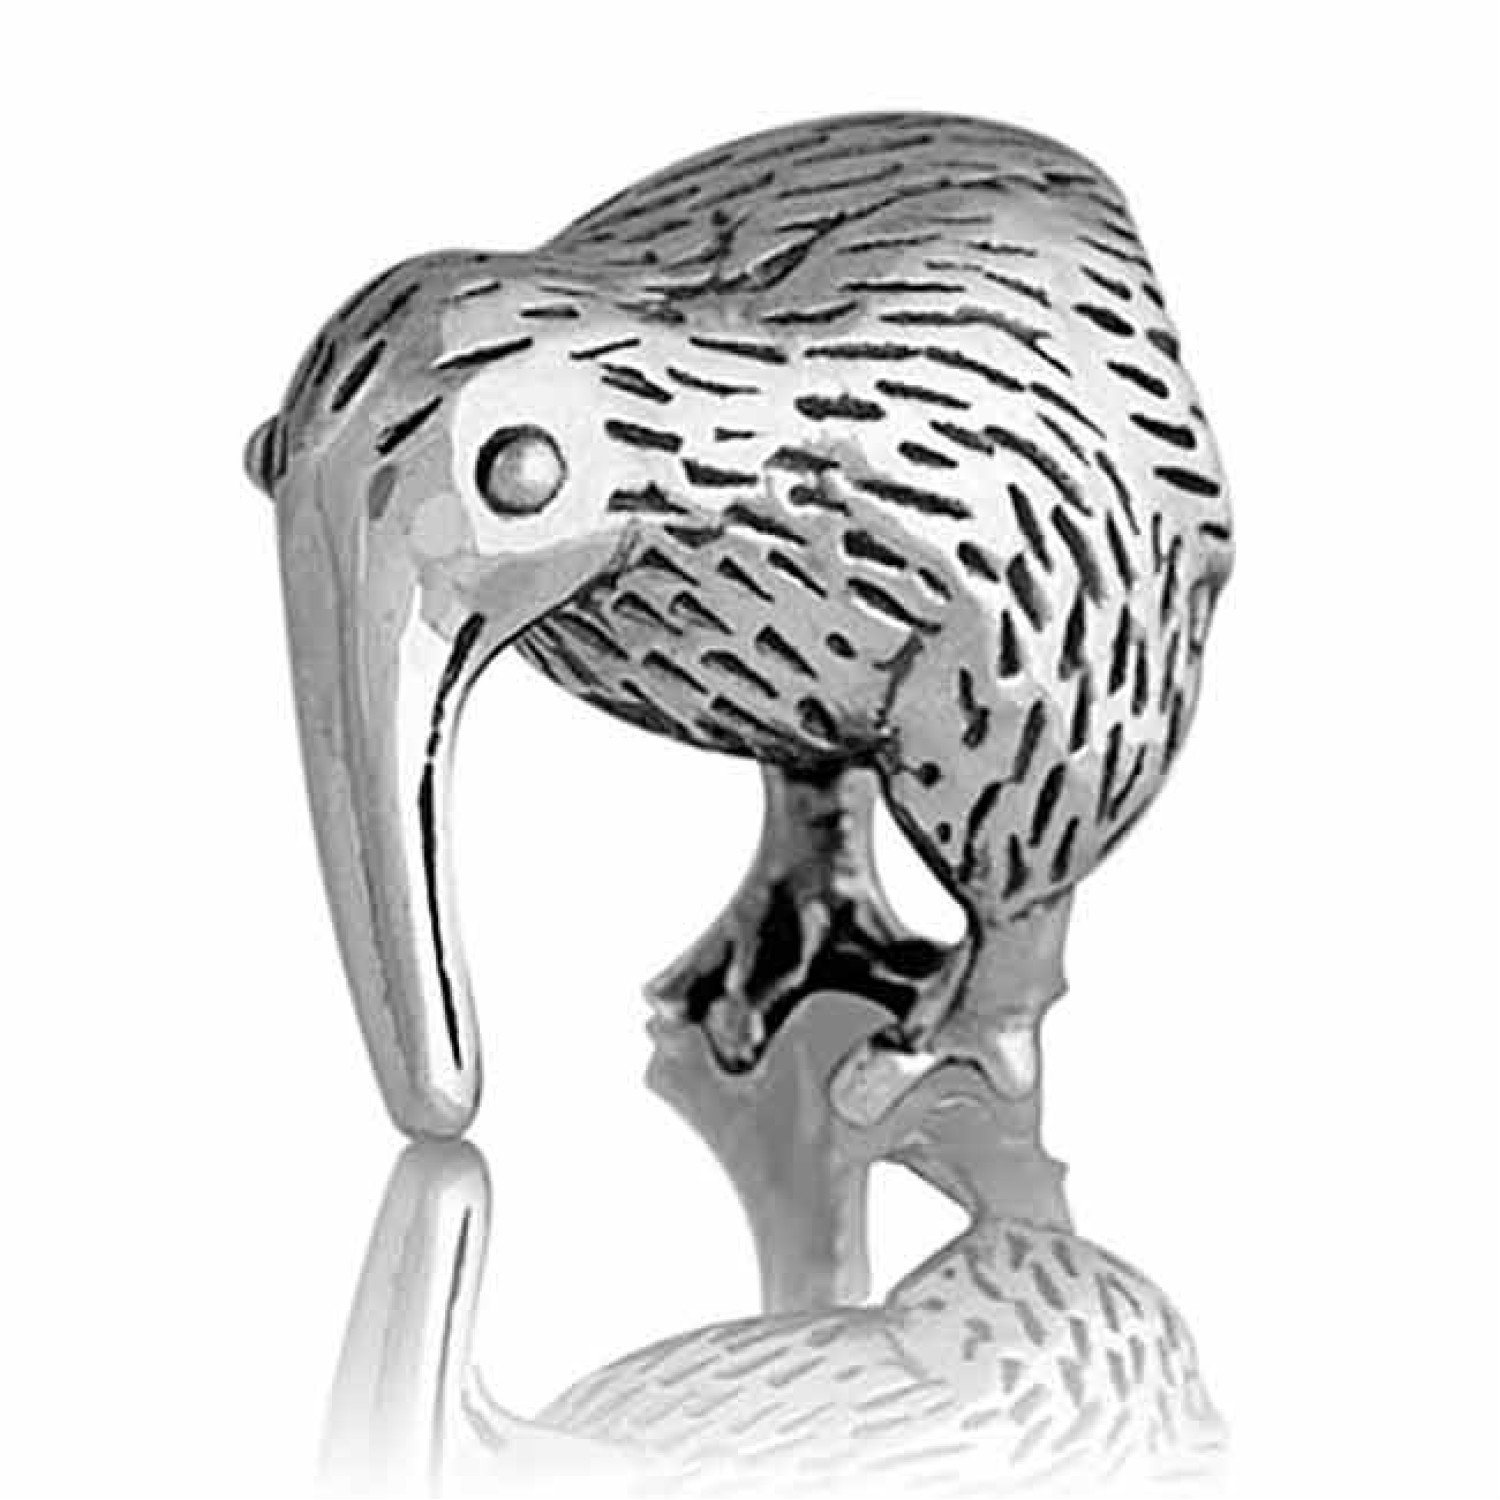 LK020 Evolve  Kiwi. ELK020 Evolve Silver Charm NZ Kiwi Endangered Flightless Bird Kiwi is the nickname used internationally for people from New Zealand, as well as being a relatively common self-reference. The name derives from the kiwi, a @christies.onli